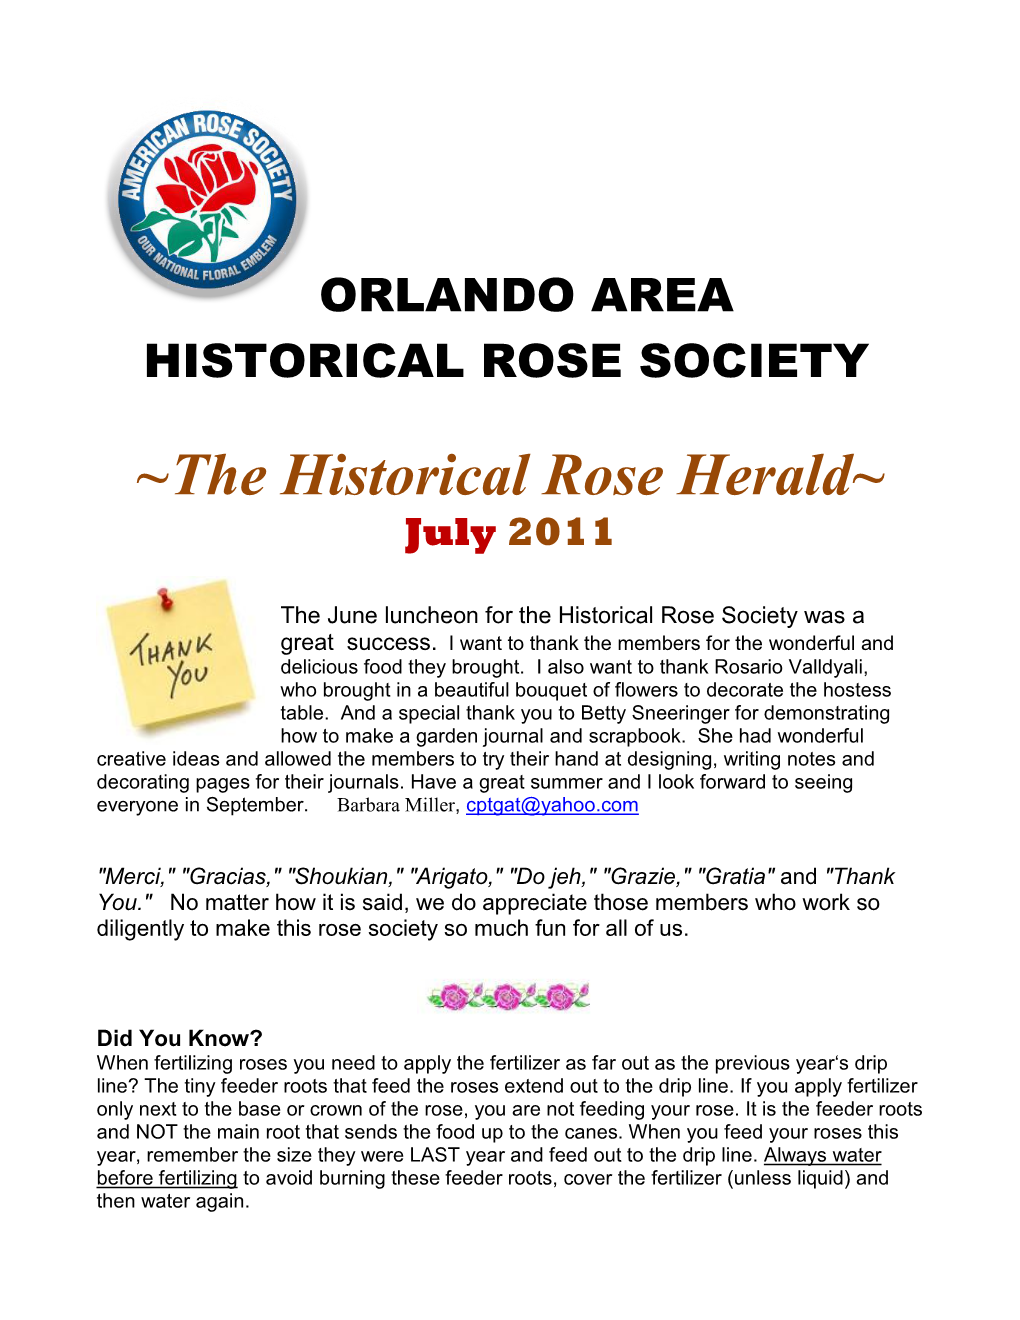 The Orlando Area Historical Rose Society Adopted the Garden As a Community Project